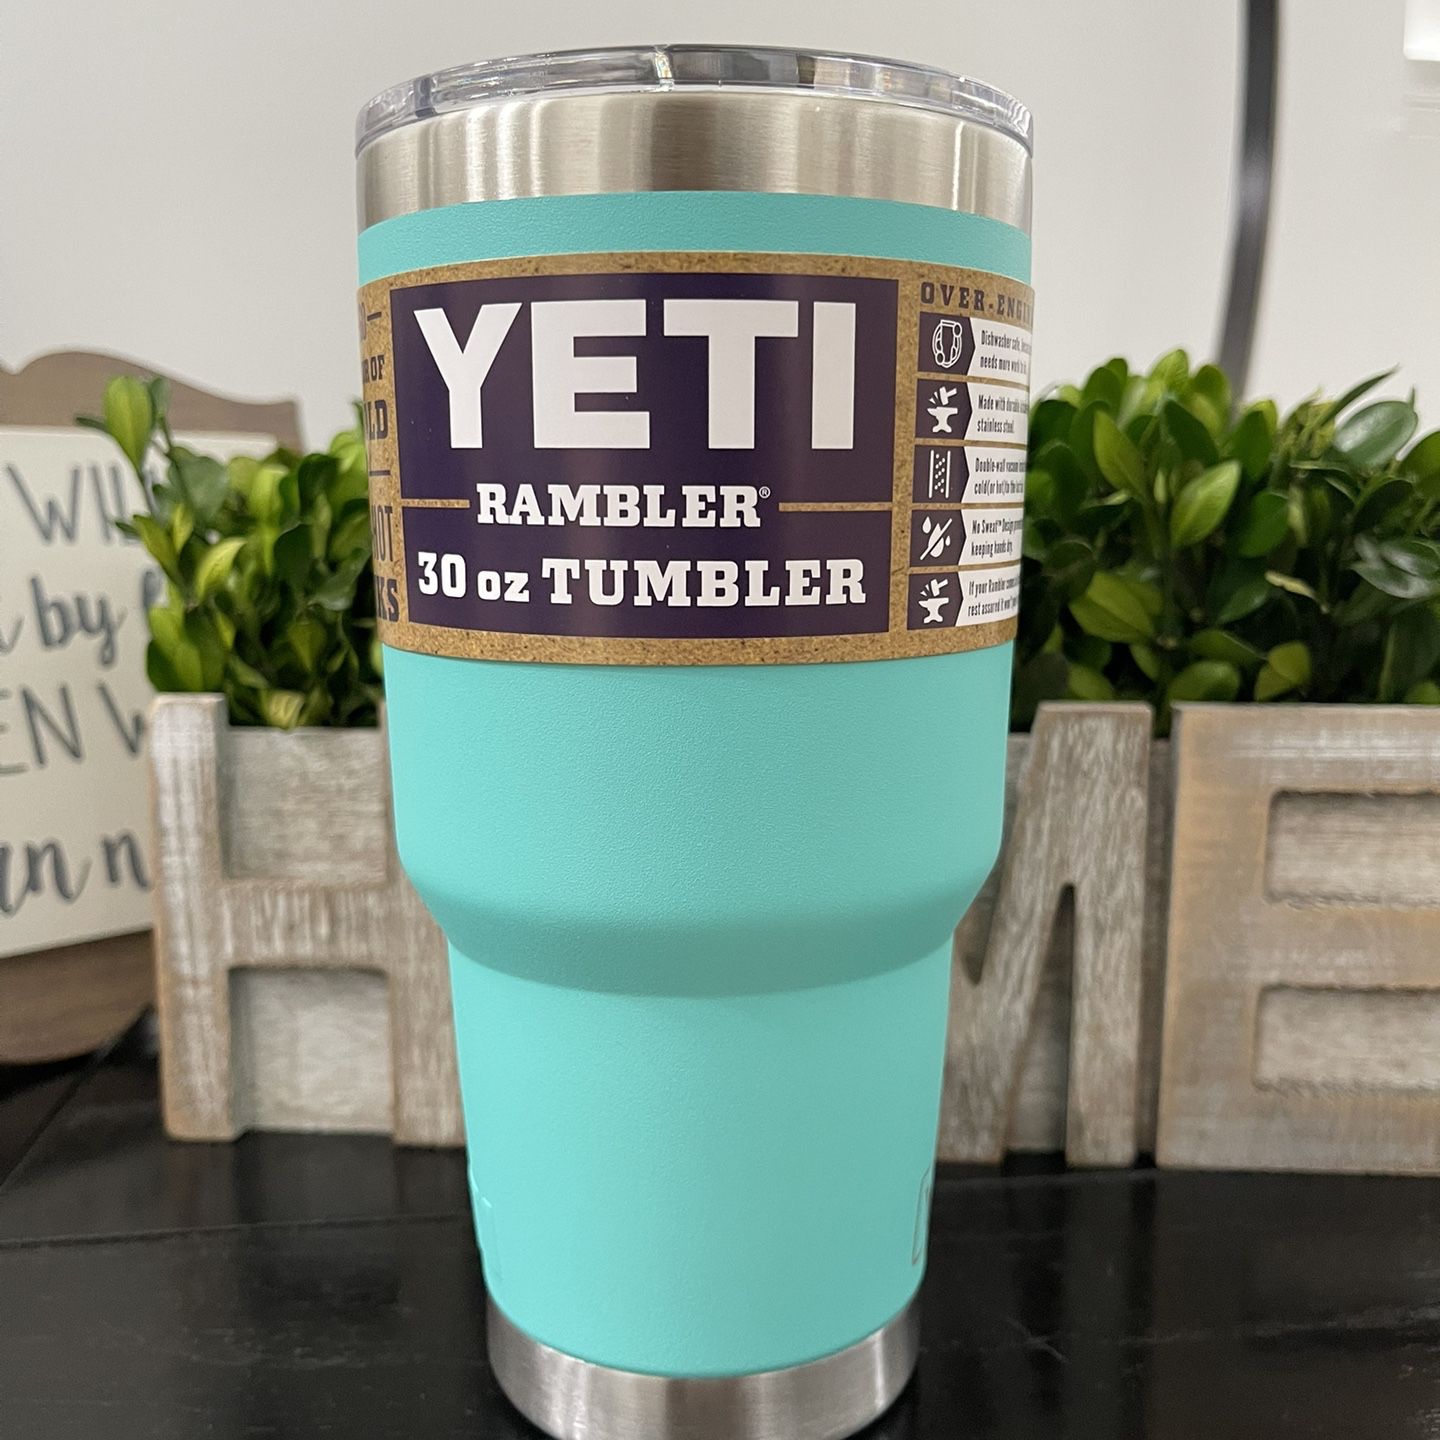 Yeti Rambler 30oz tumbler Thermo With Magnetic Lid for Sale in